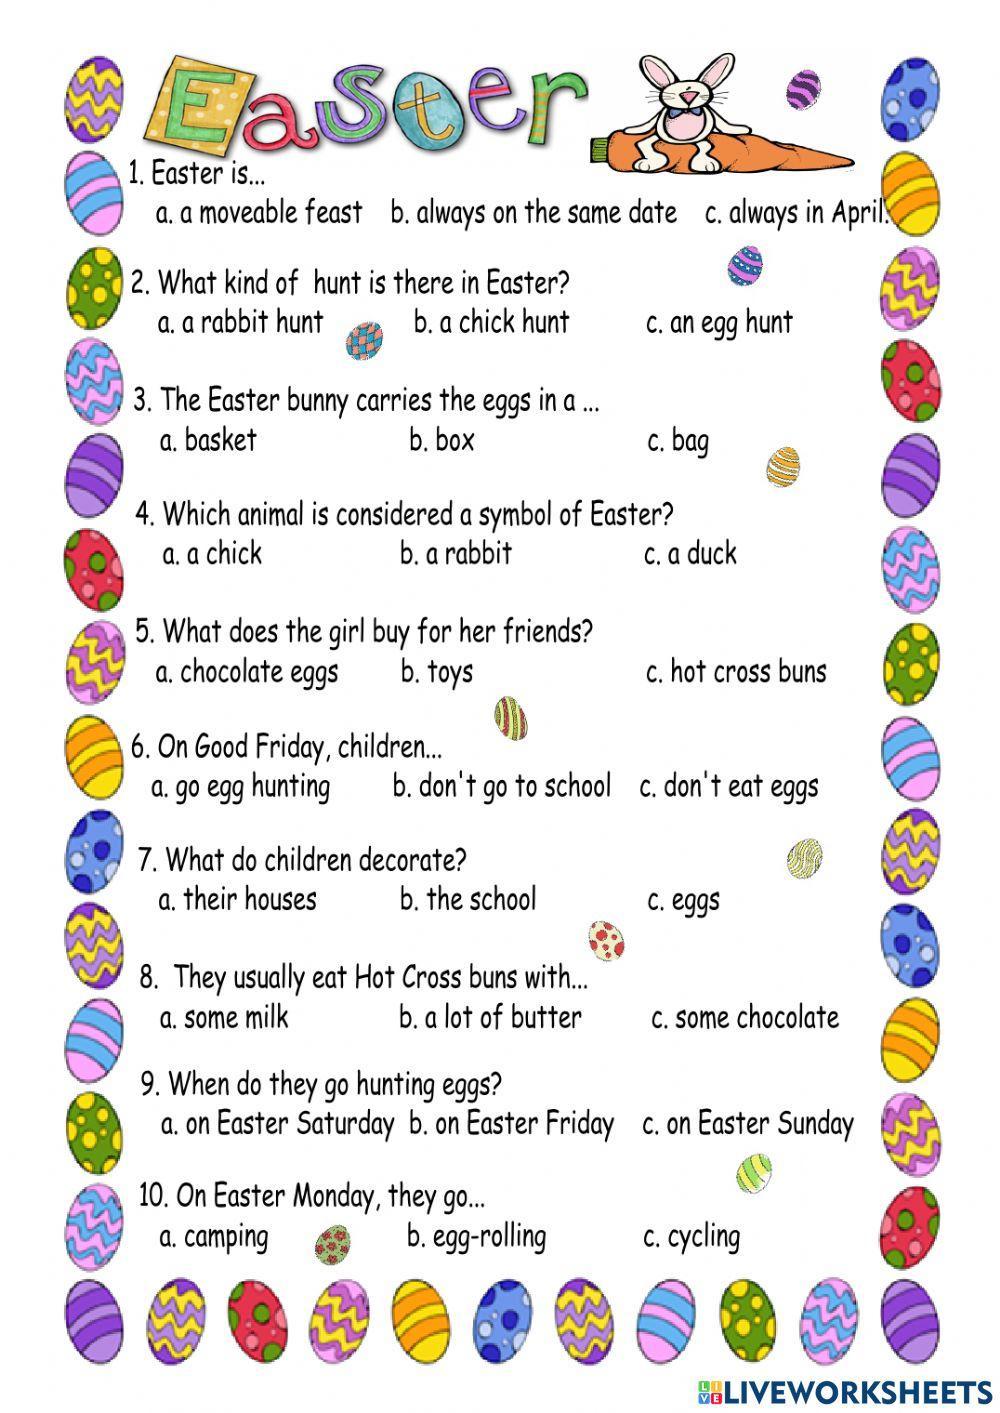 Easter Quizz